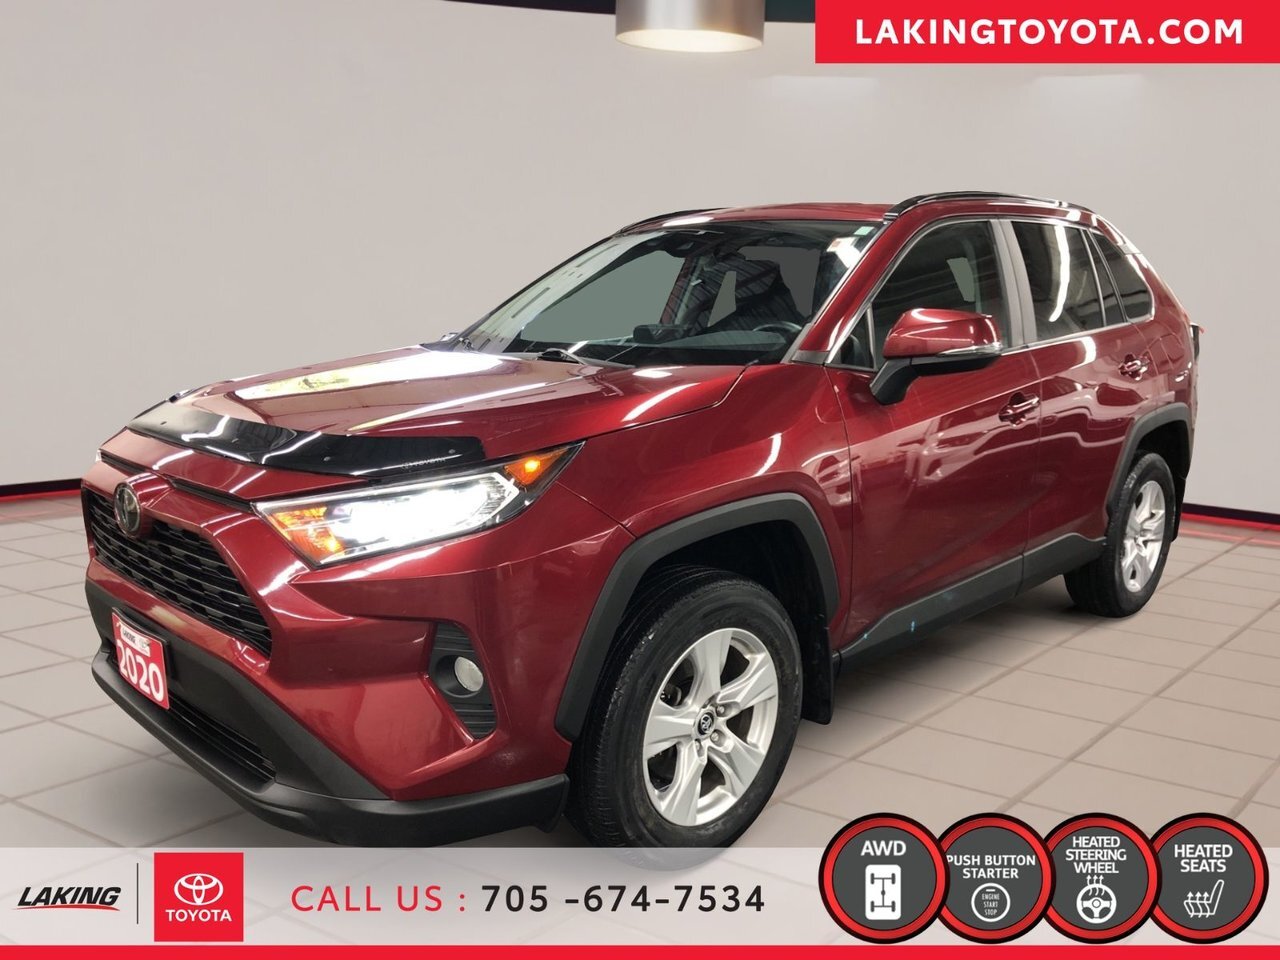 2020 Toyota RAV4 XLE All Wheel Drive This Toyota Hybrid delivers wh